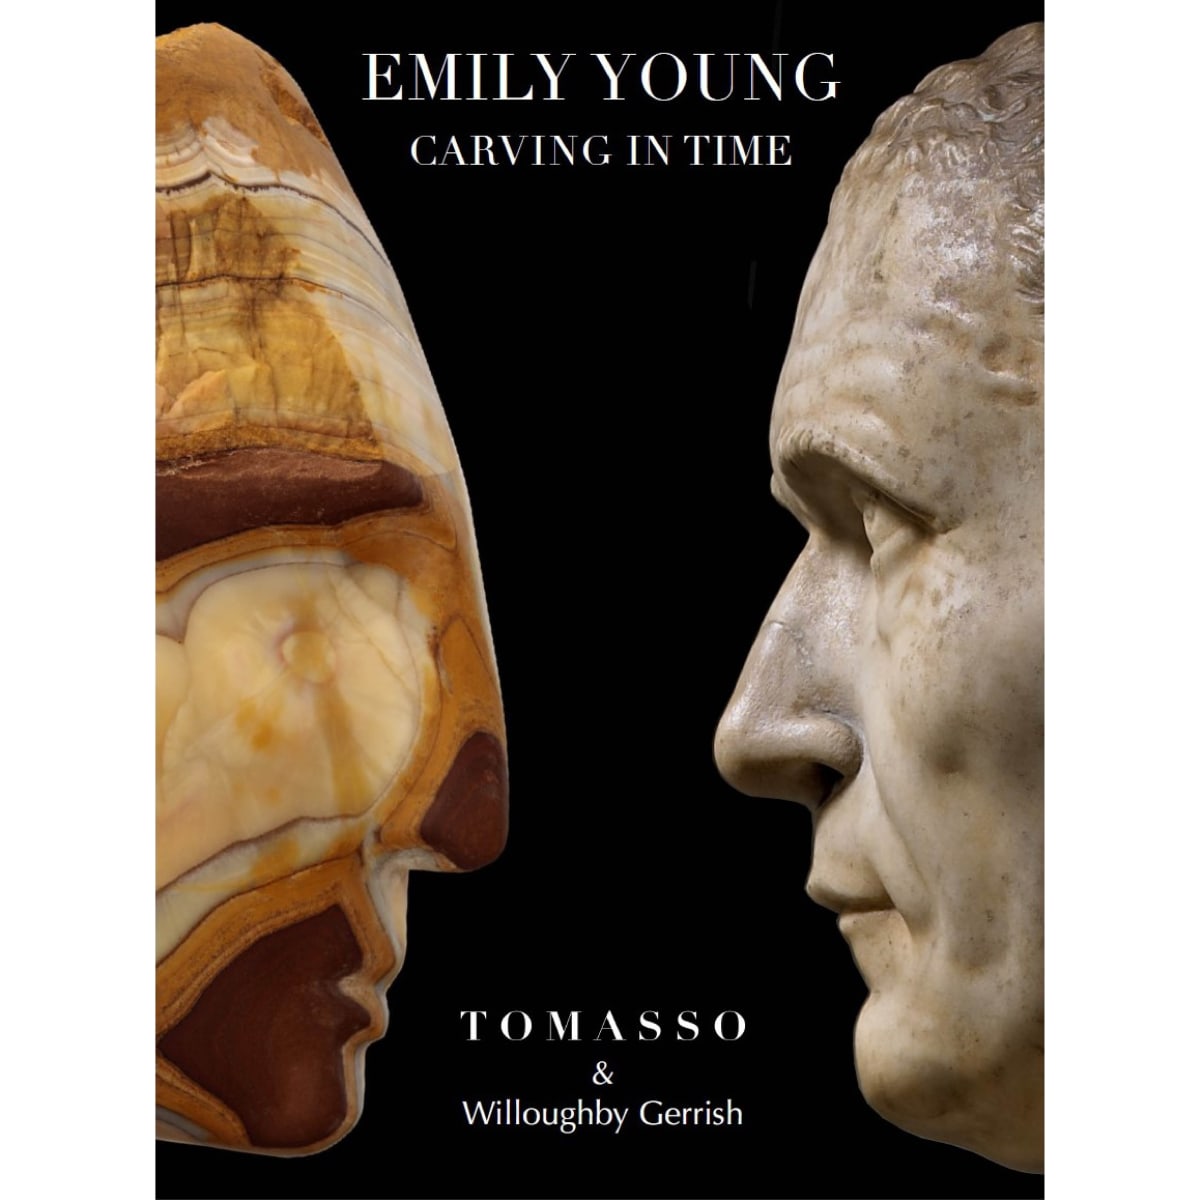 Emily Young: Carving in Time